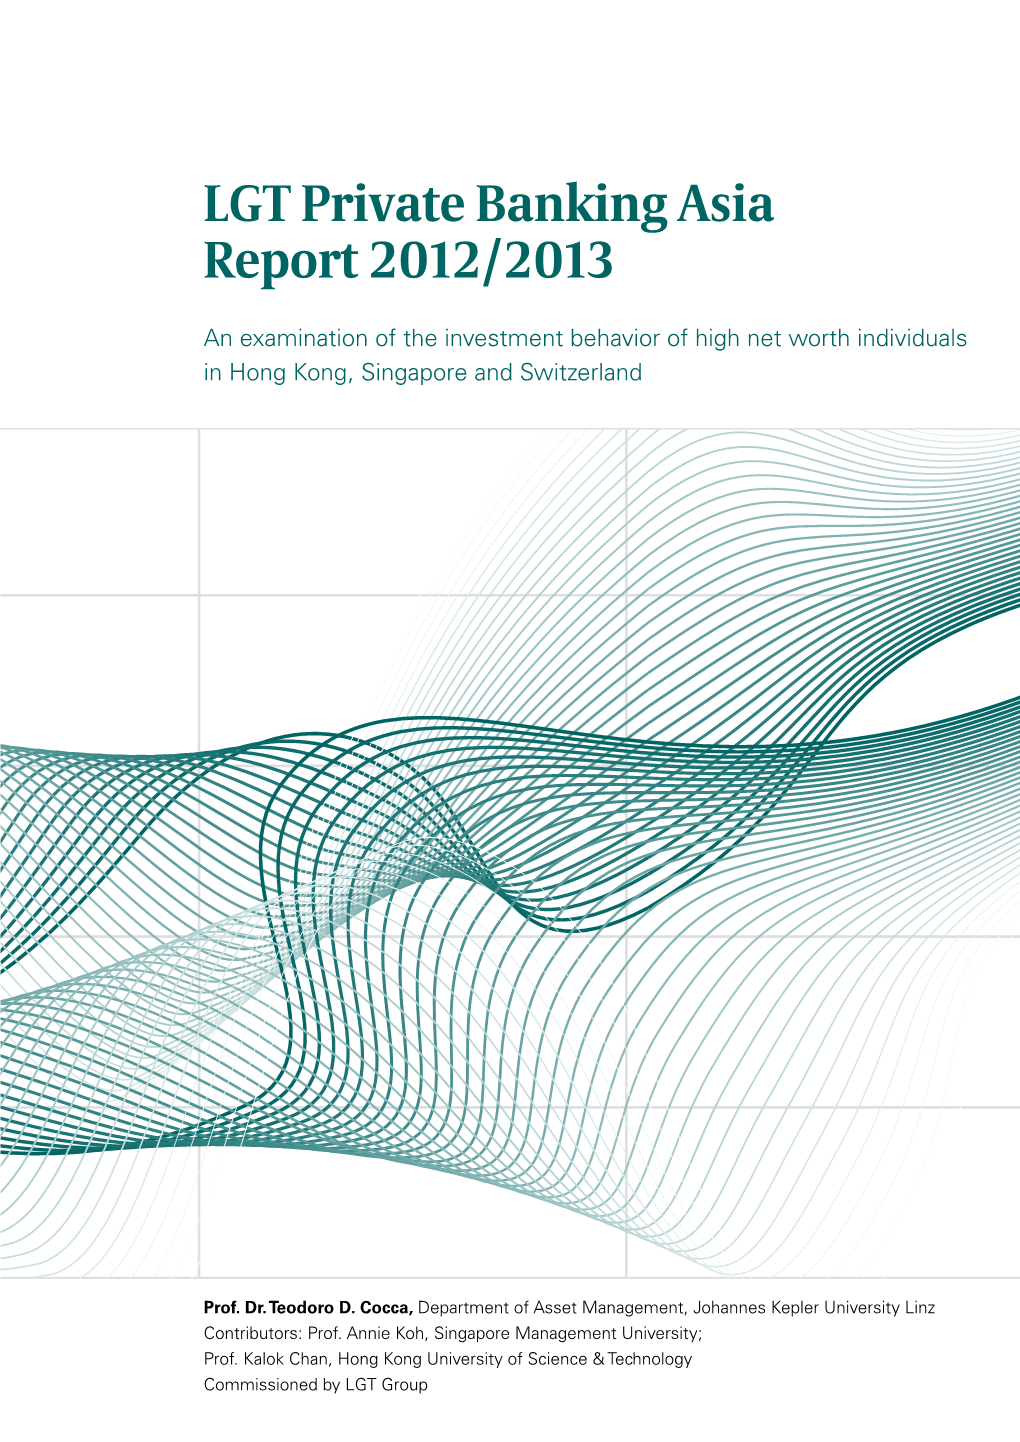 LGT Private Banking Asia Report 2012/2013